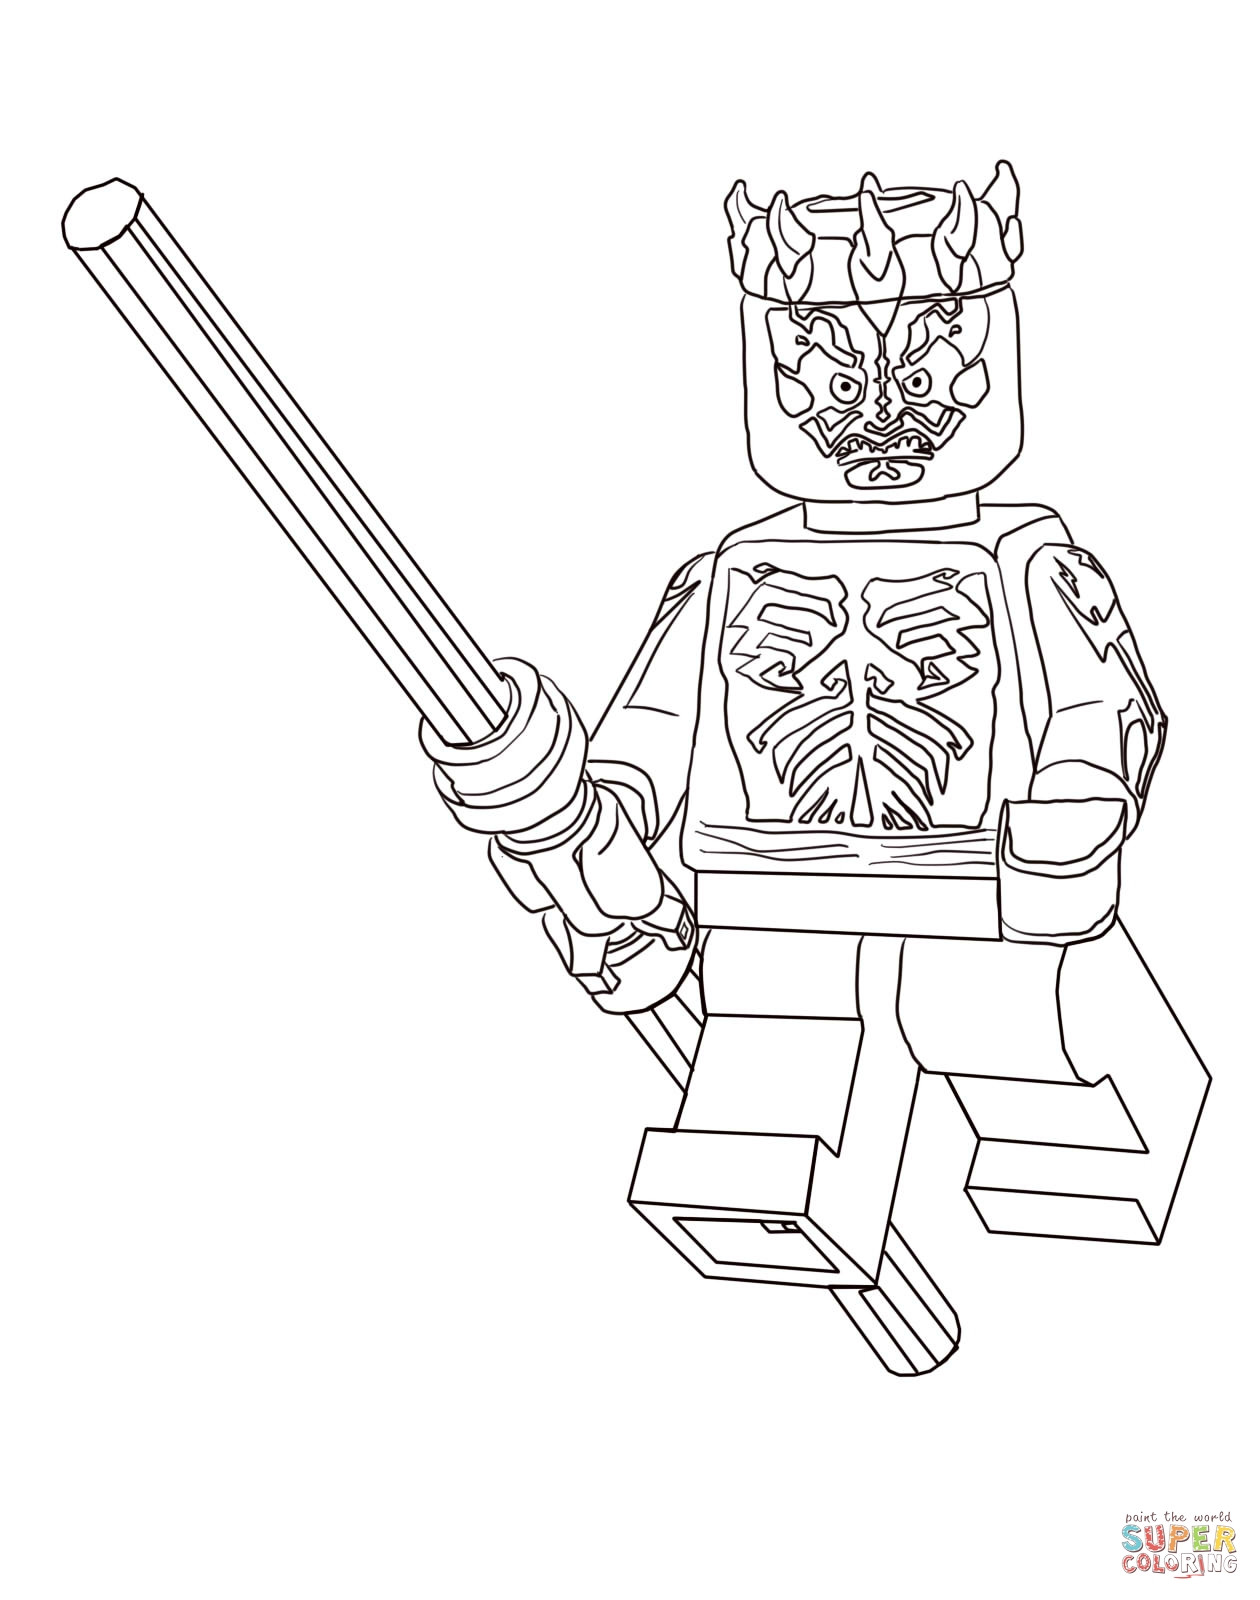 Lego Darth Vader Coloring Pages at GetColorings.com | Free printable